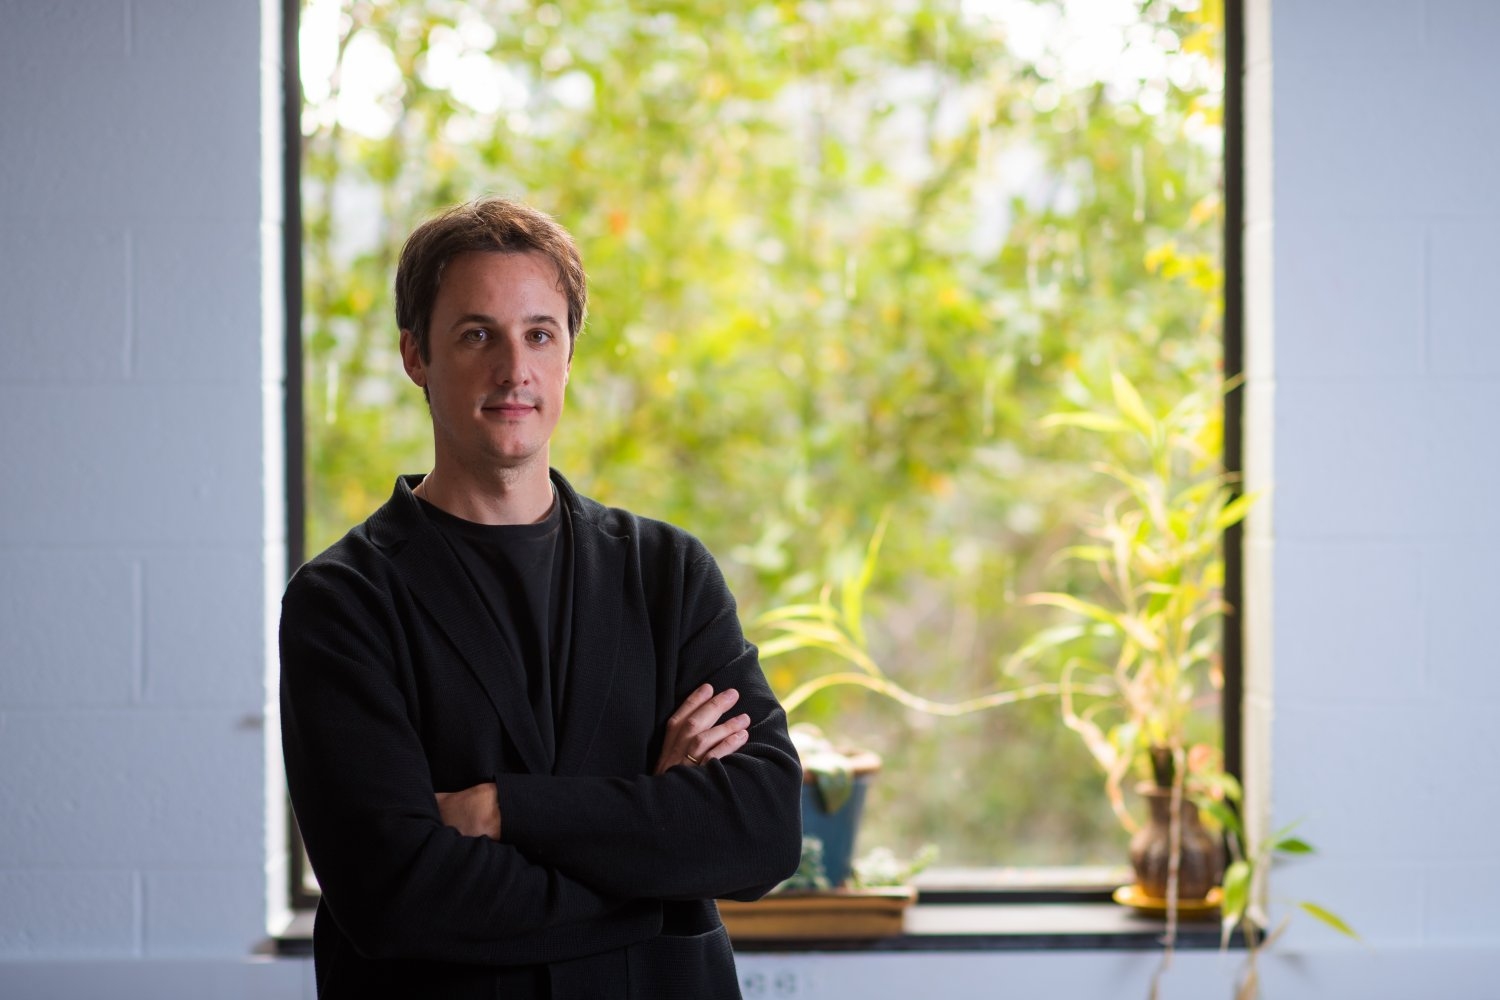 César Terrer is an assistant professor in the MIT Department of Civil and Environmental Engineering.